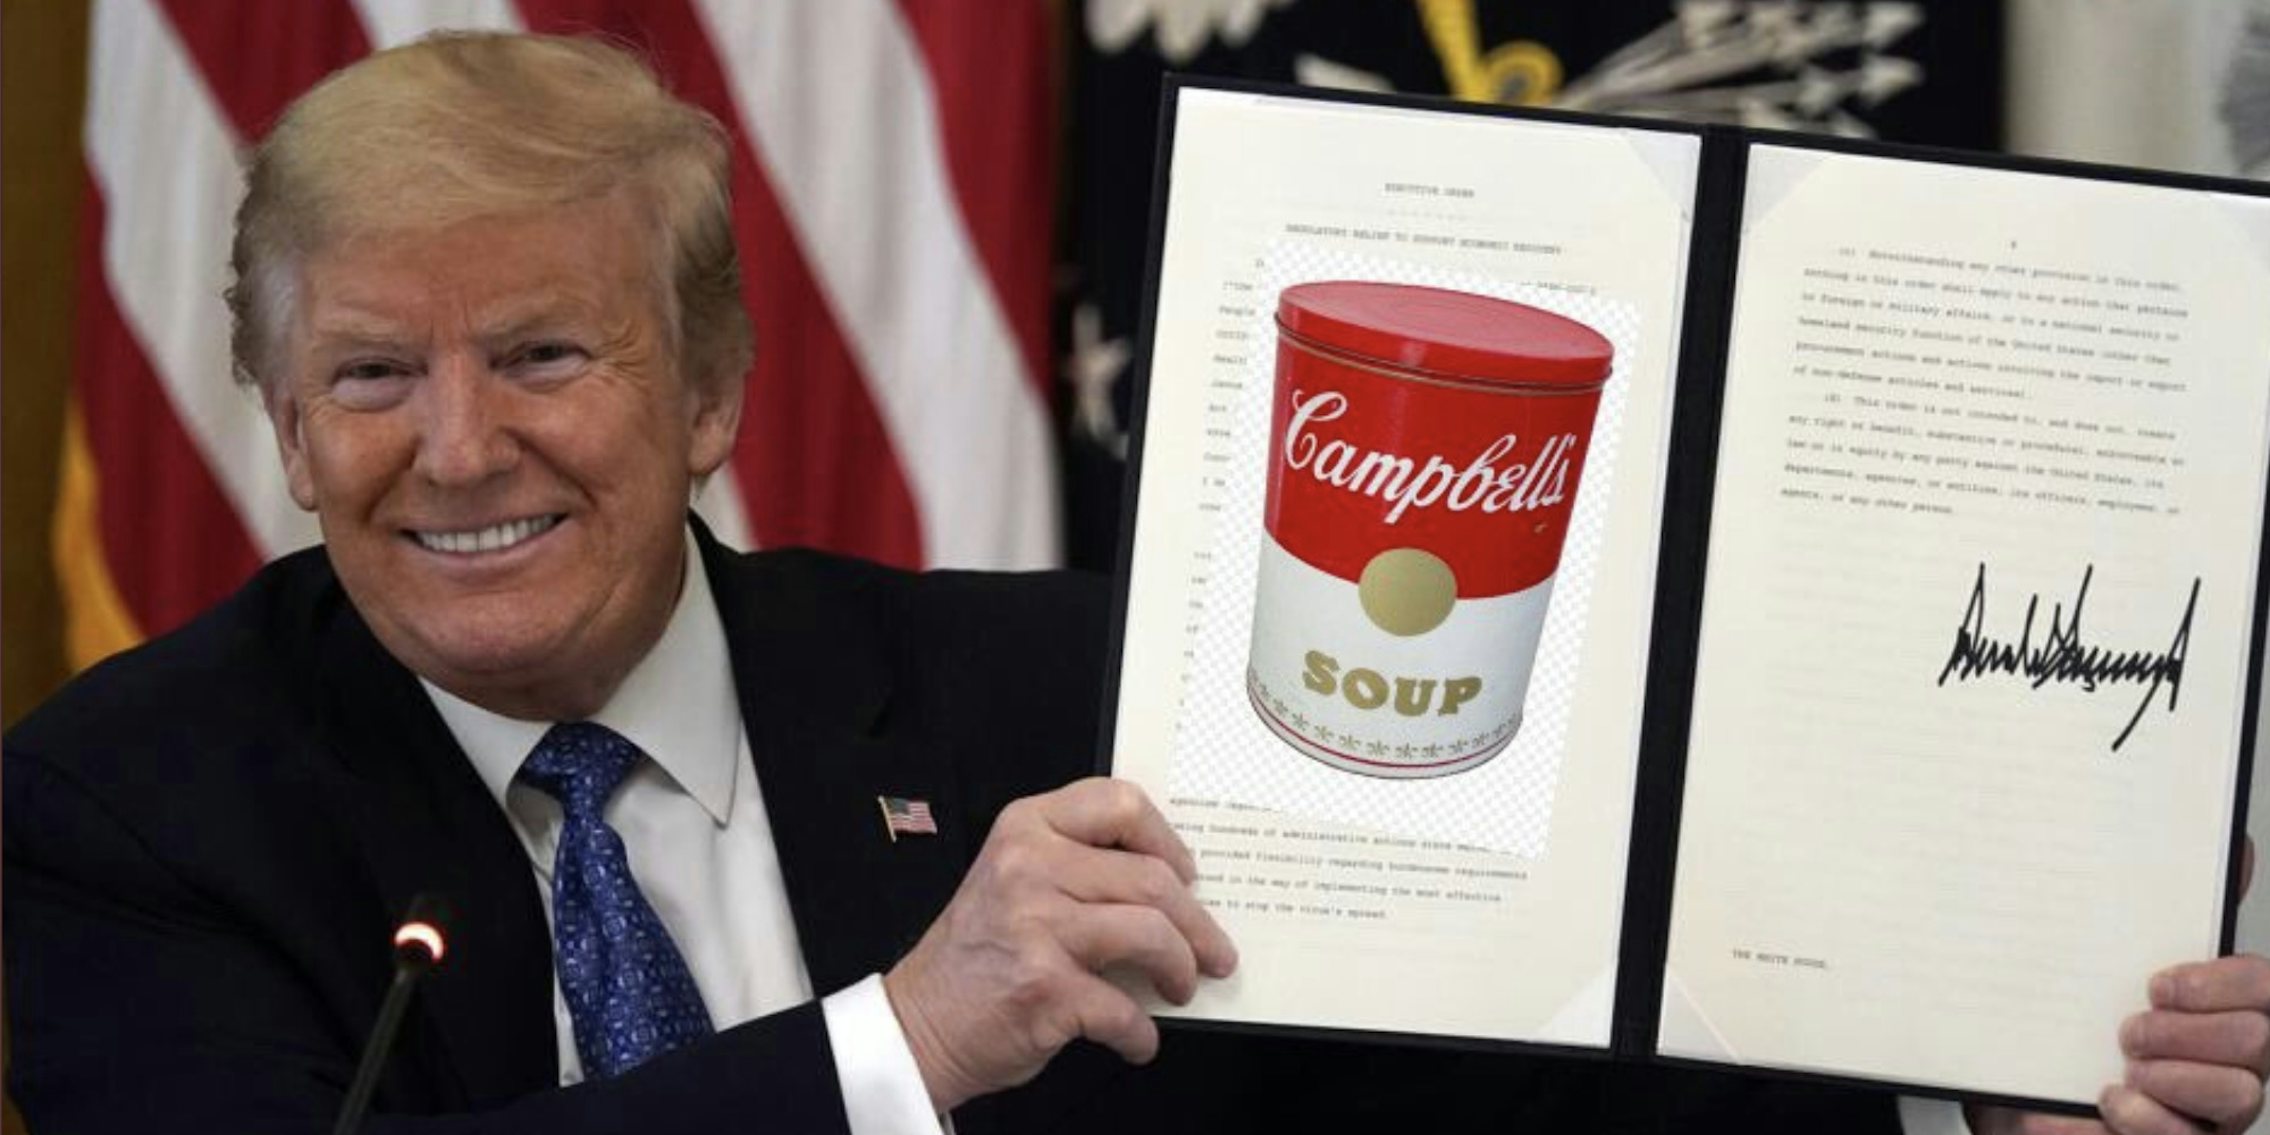 Trump holding an executive older folder with a picture of Campbells soup on it